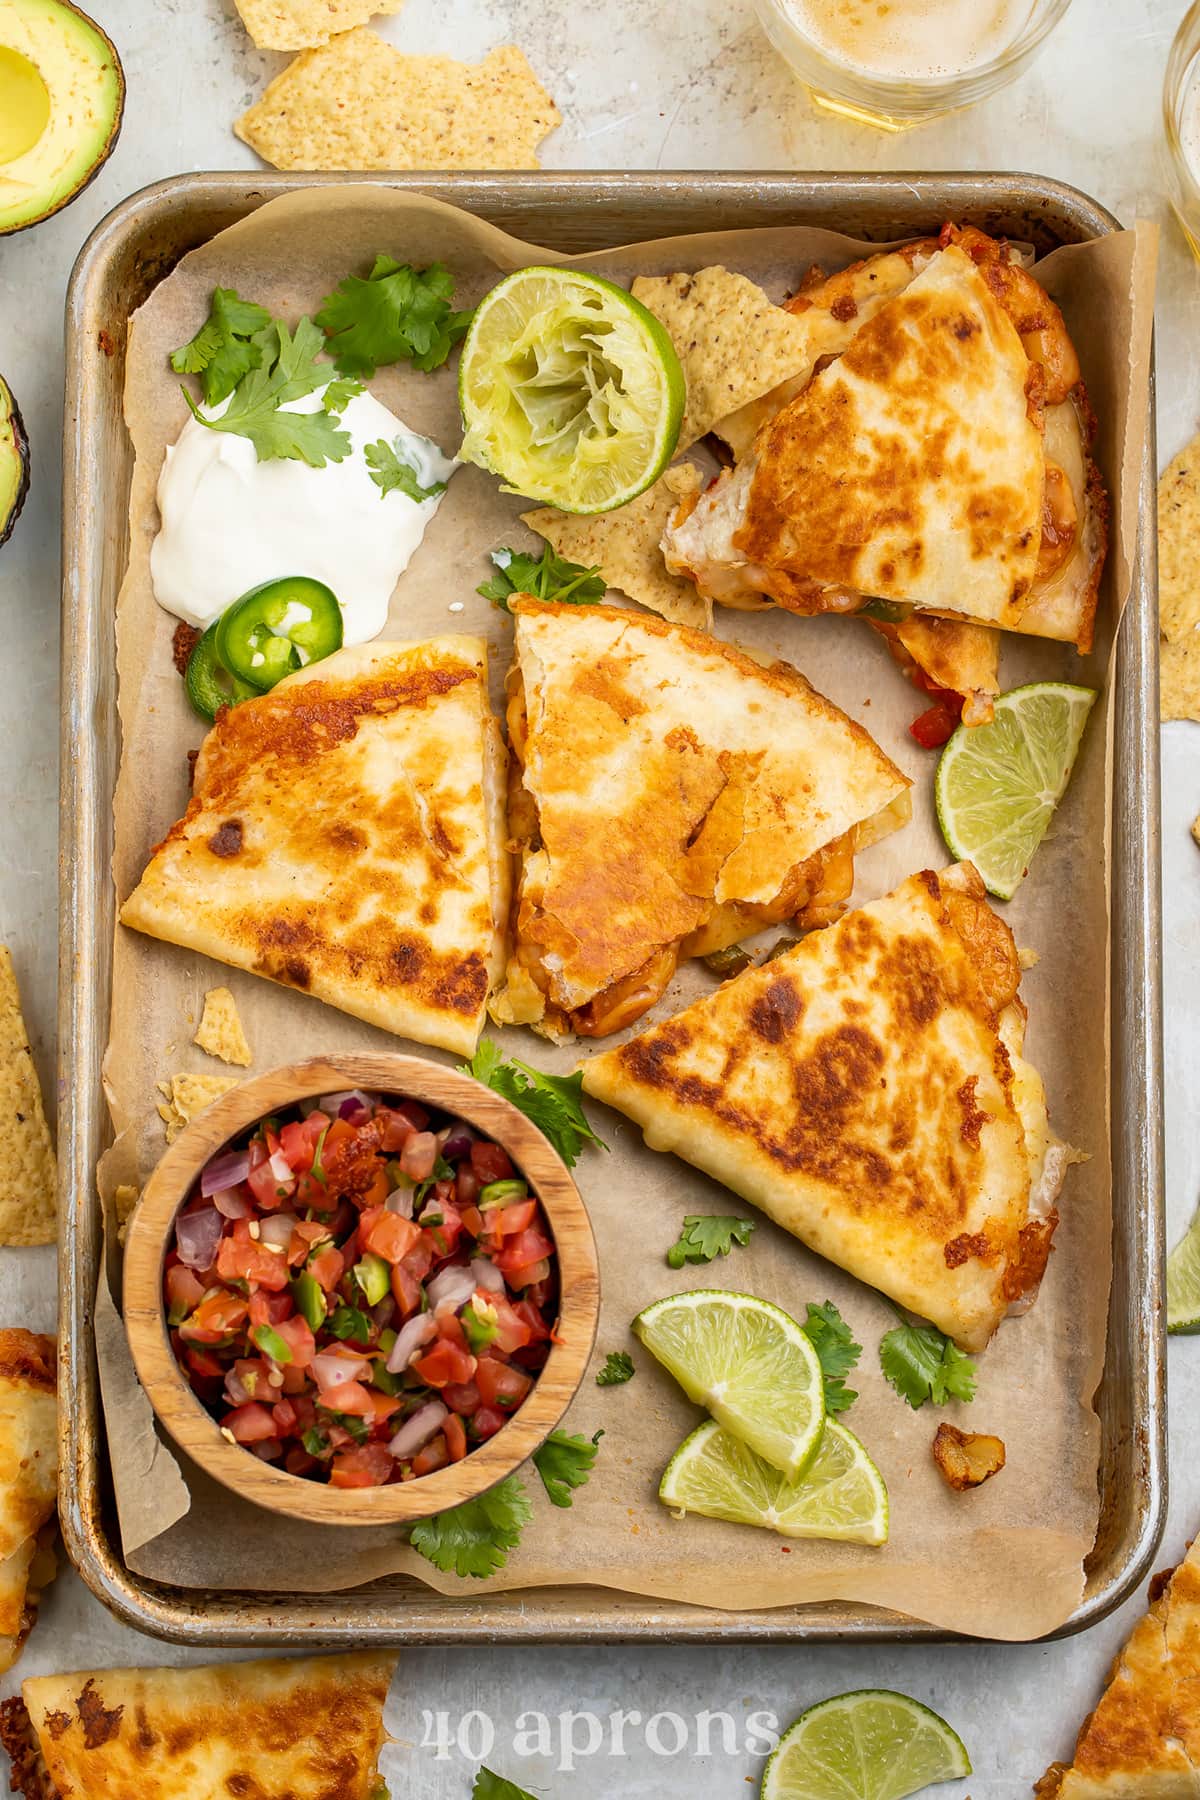 Overhead view of a shrimp quesadilla cut into 3 wedge-shaped slices surrounded by toppings.